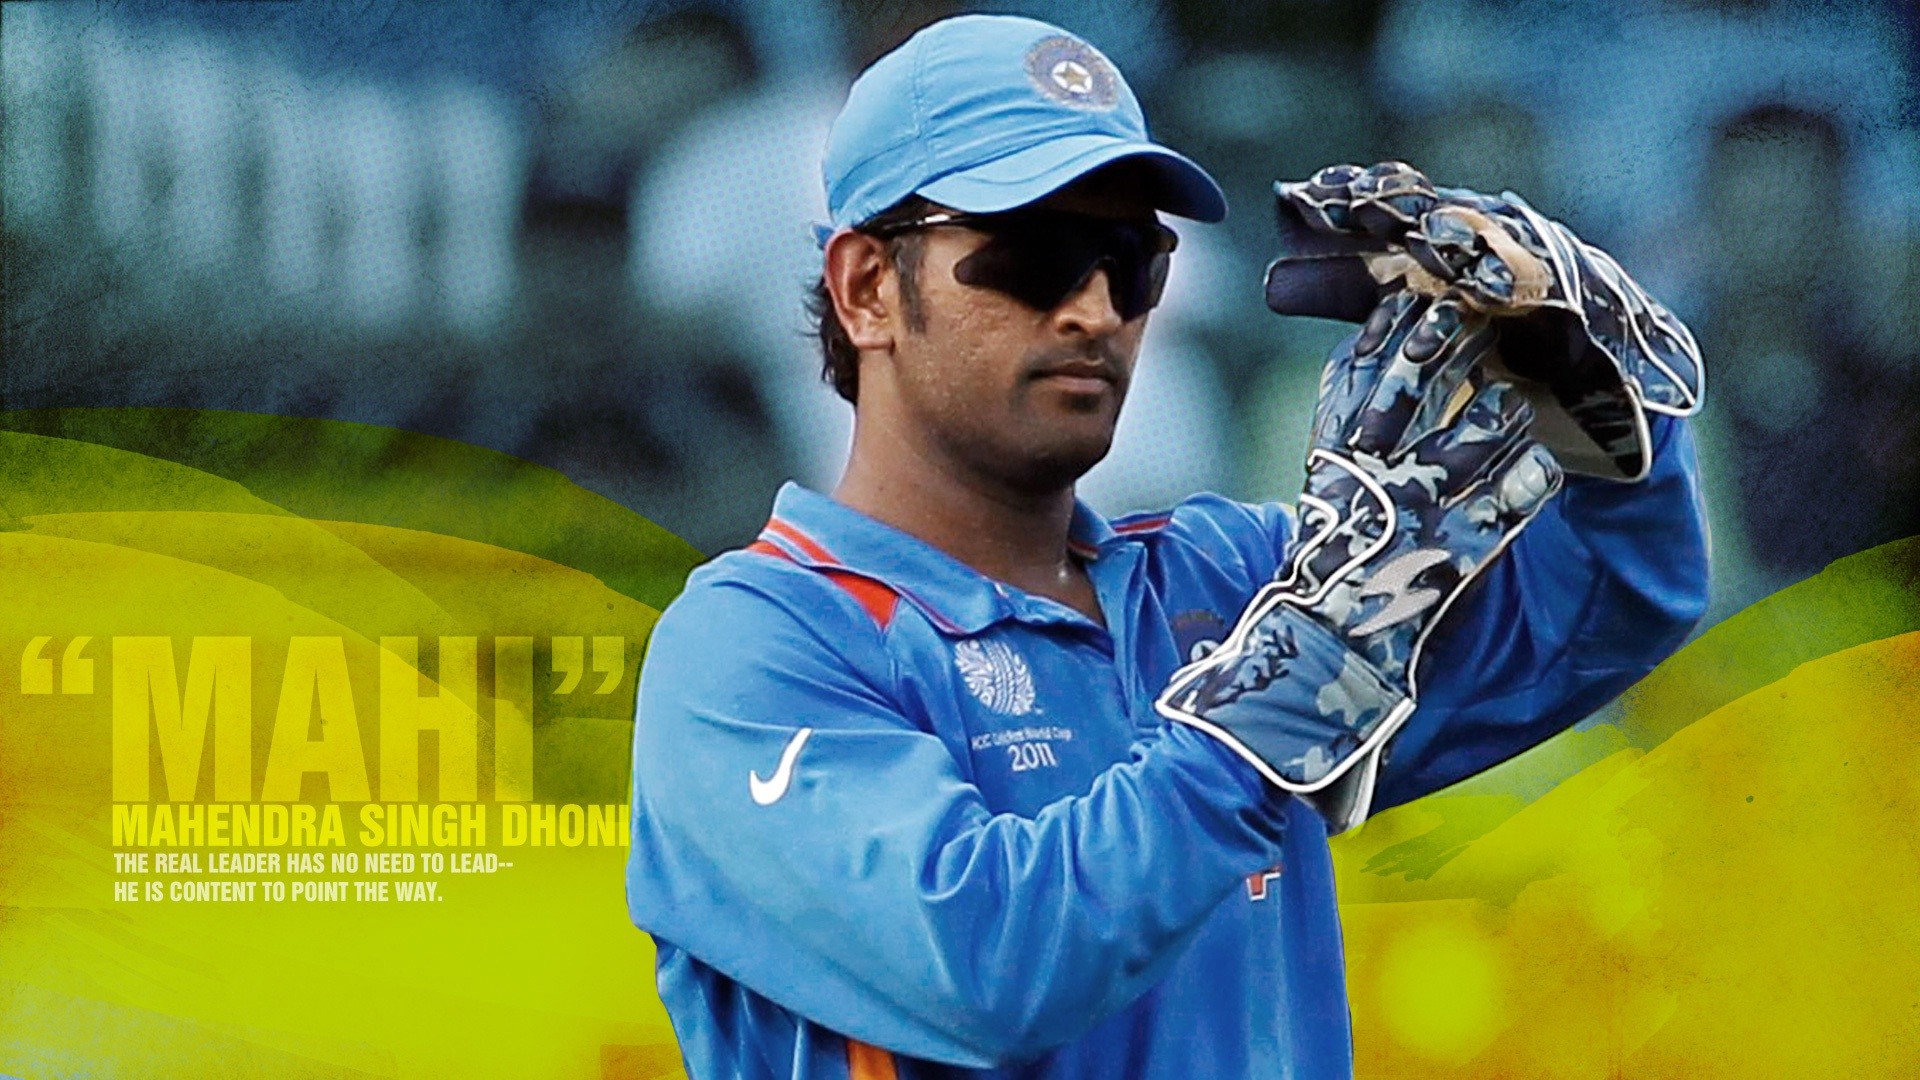 Ms Dhoni Hd Photos Csk Download Âœ“ The Galleries Of - Captain Cool Ms Dhoni  - 1920x1080 Wallpaper 